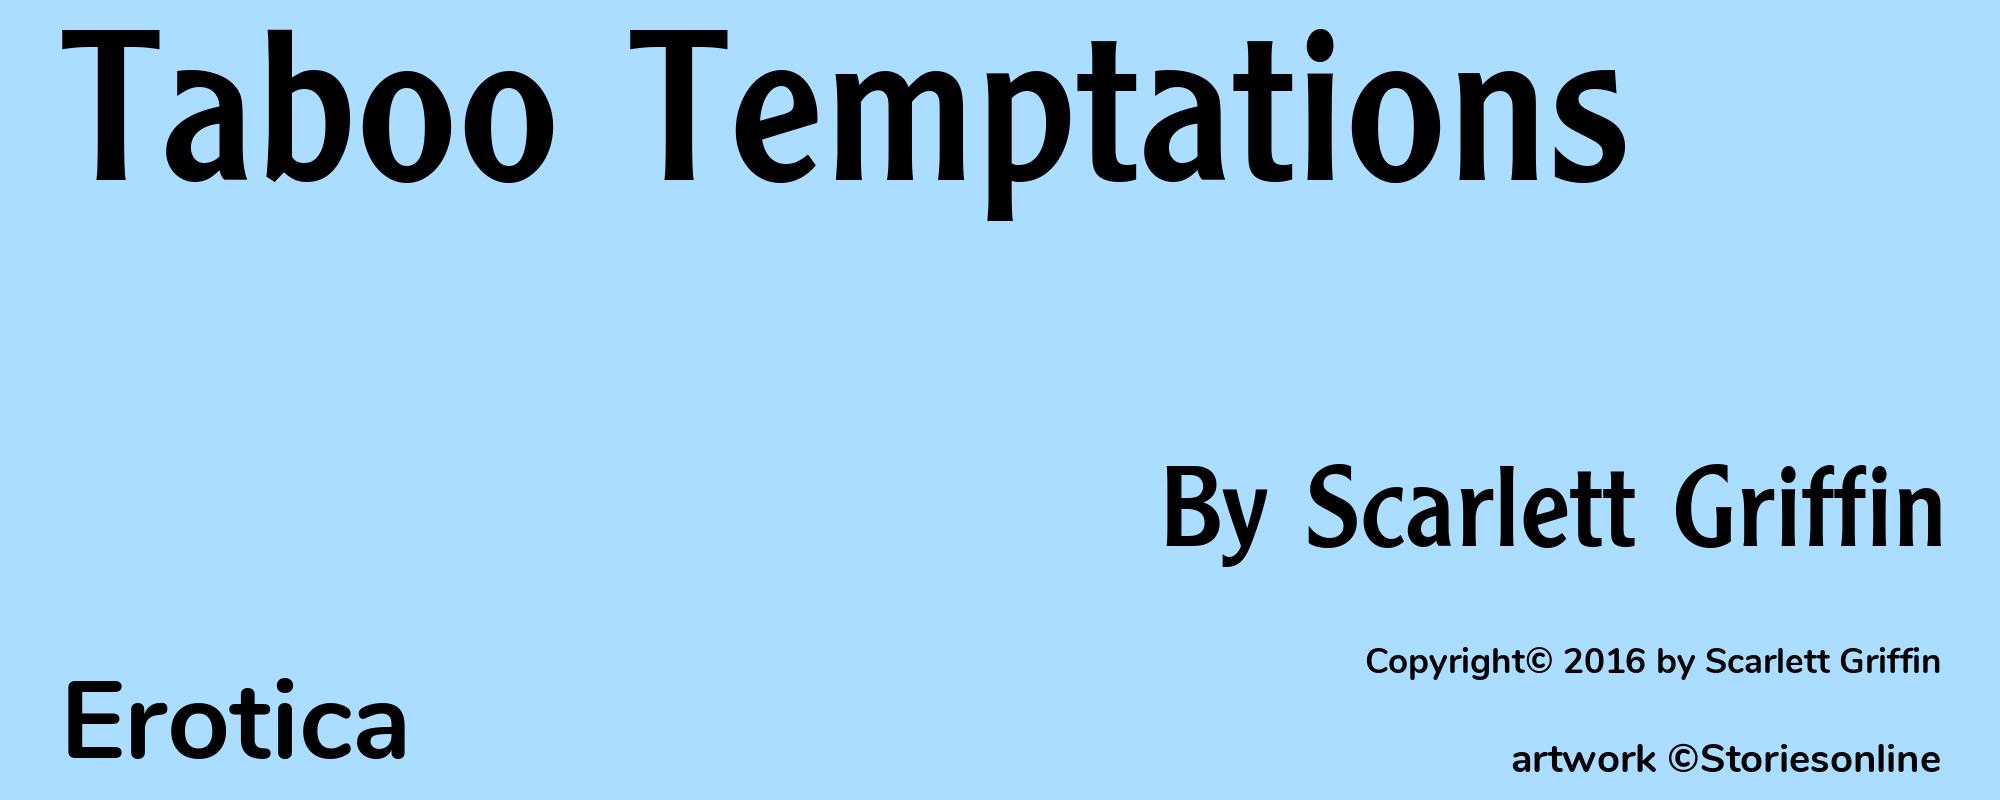 Taboo Temptations - Cover